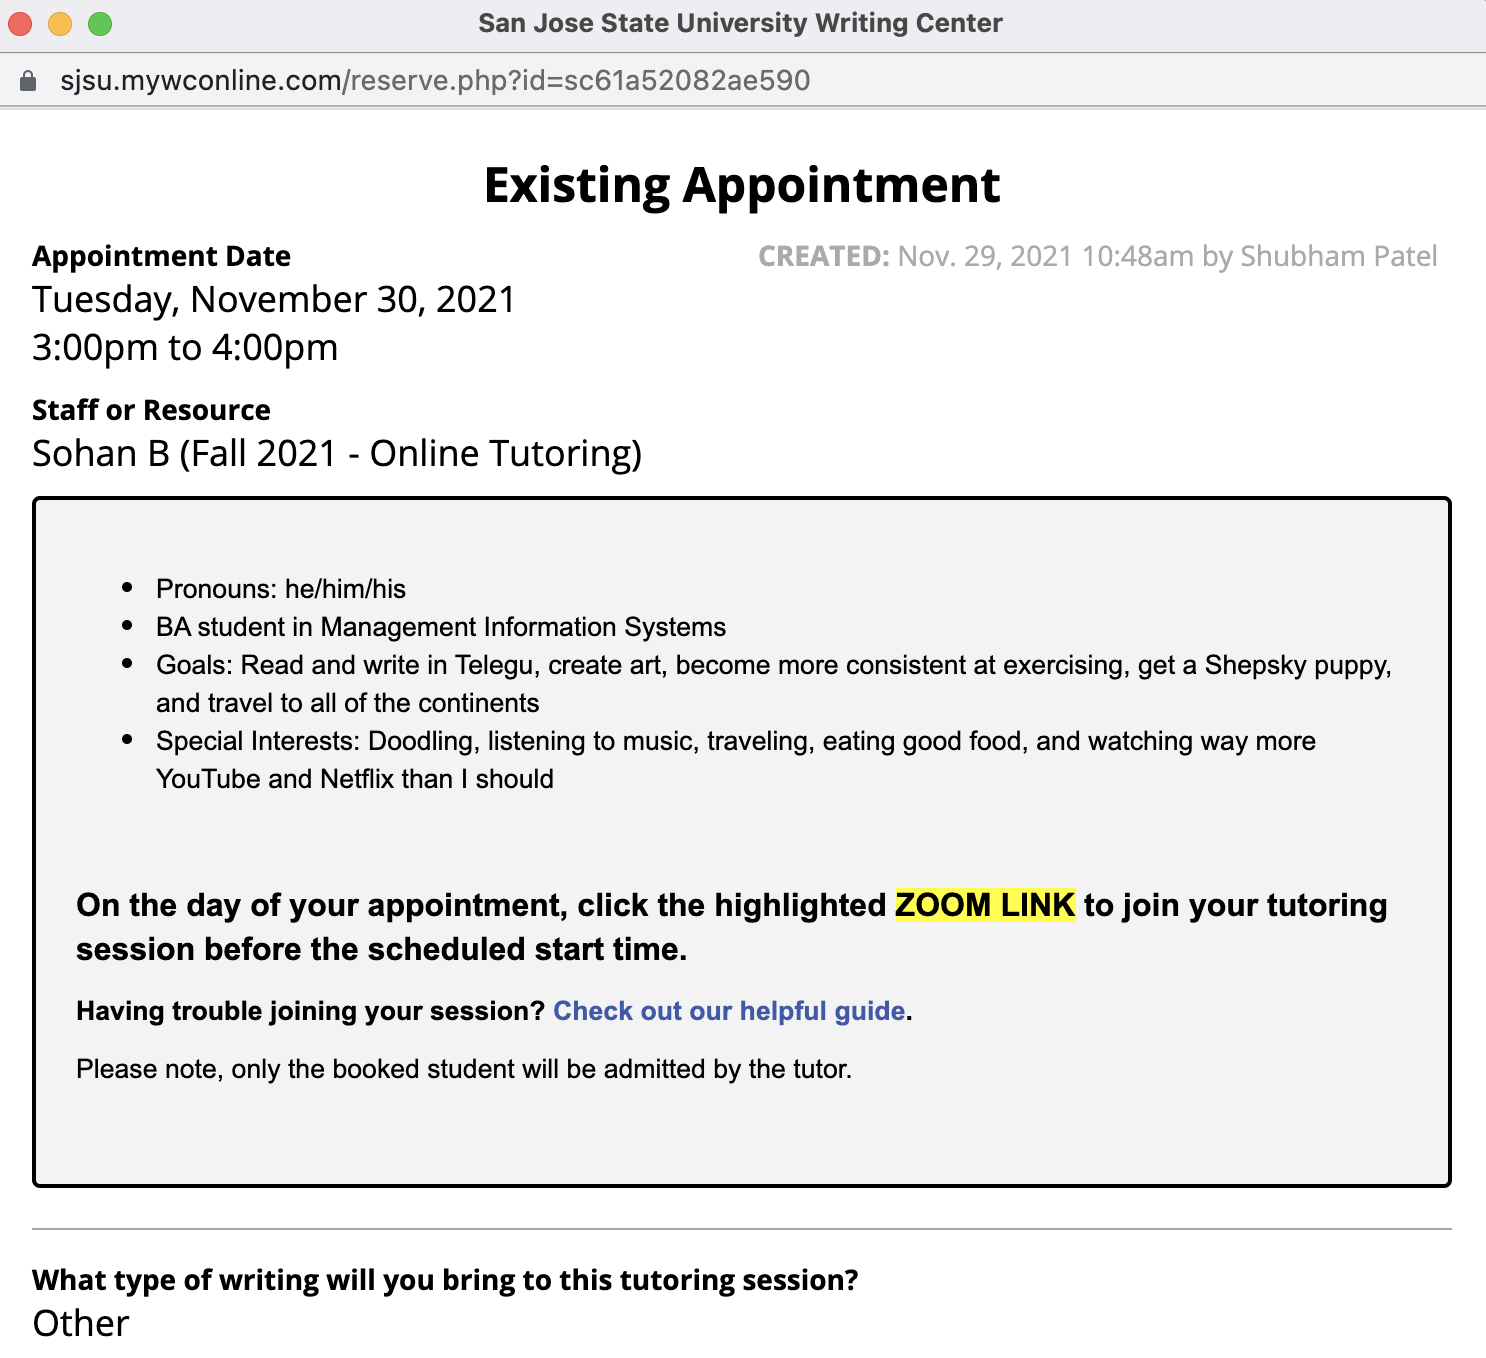 Existing appointment page in WCOnline